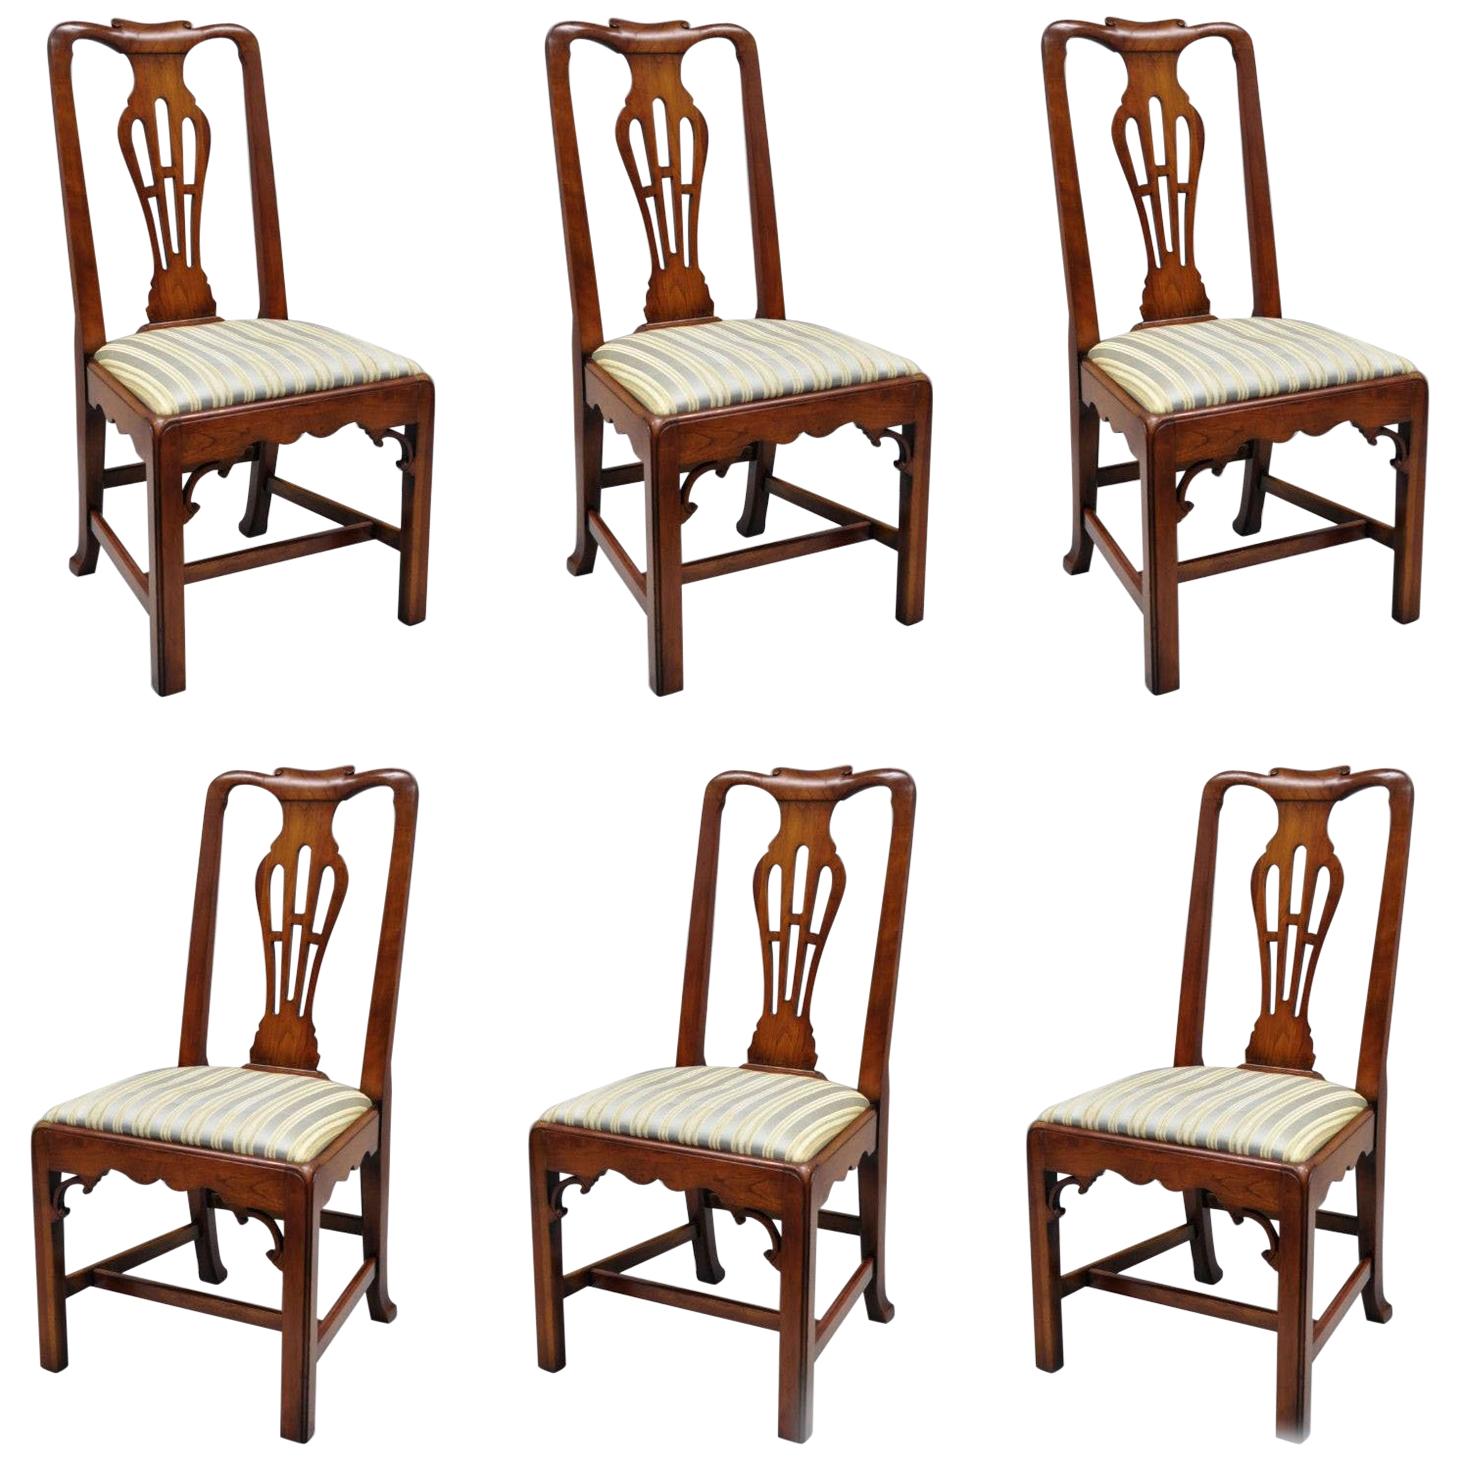 6 Statton Centennial Cherry Chippendale Style Dining Chairs for Duckloe